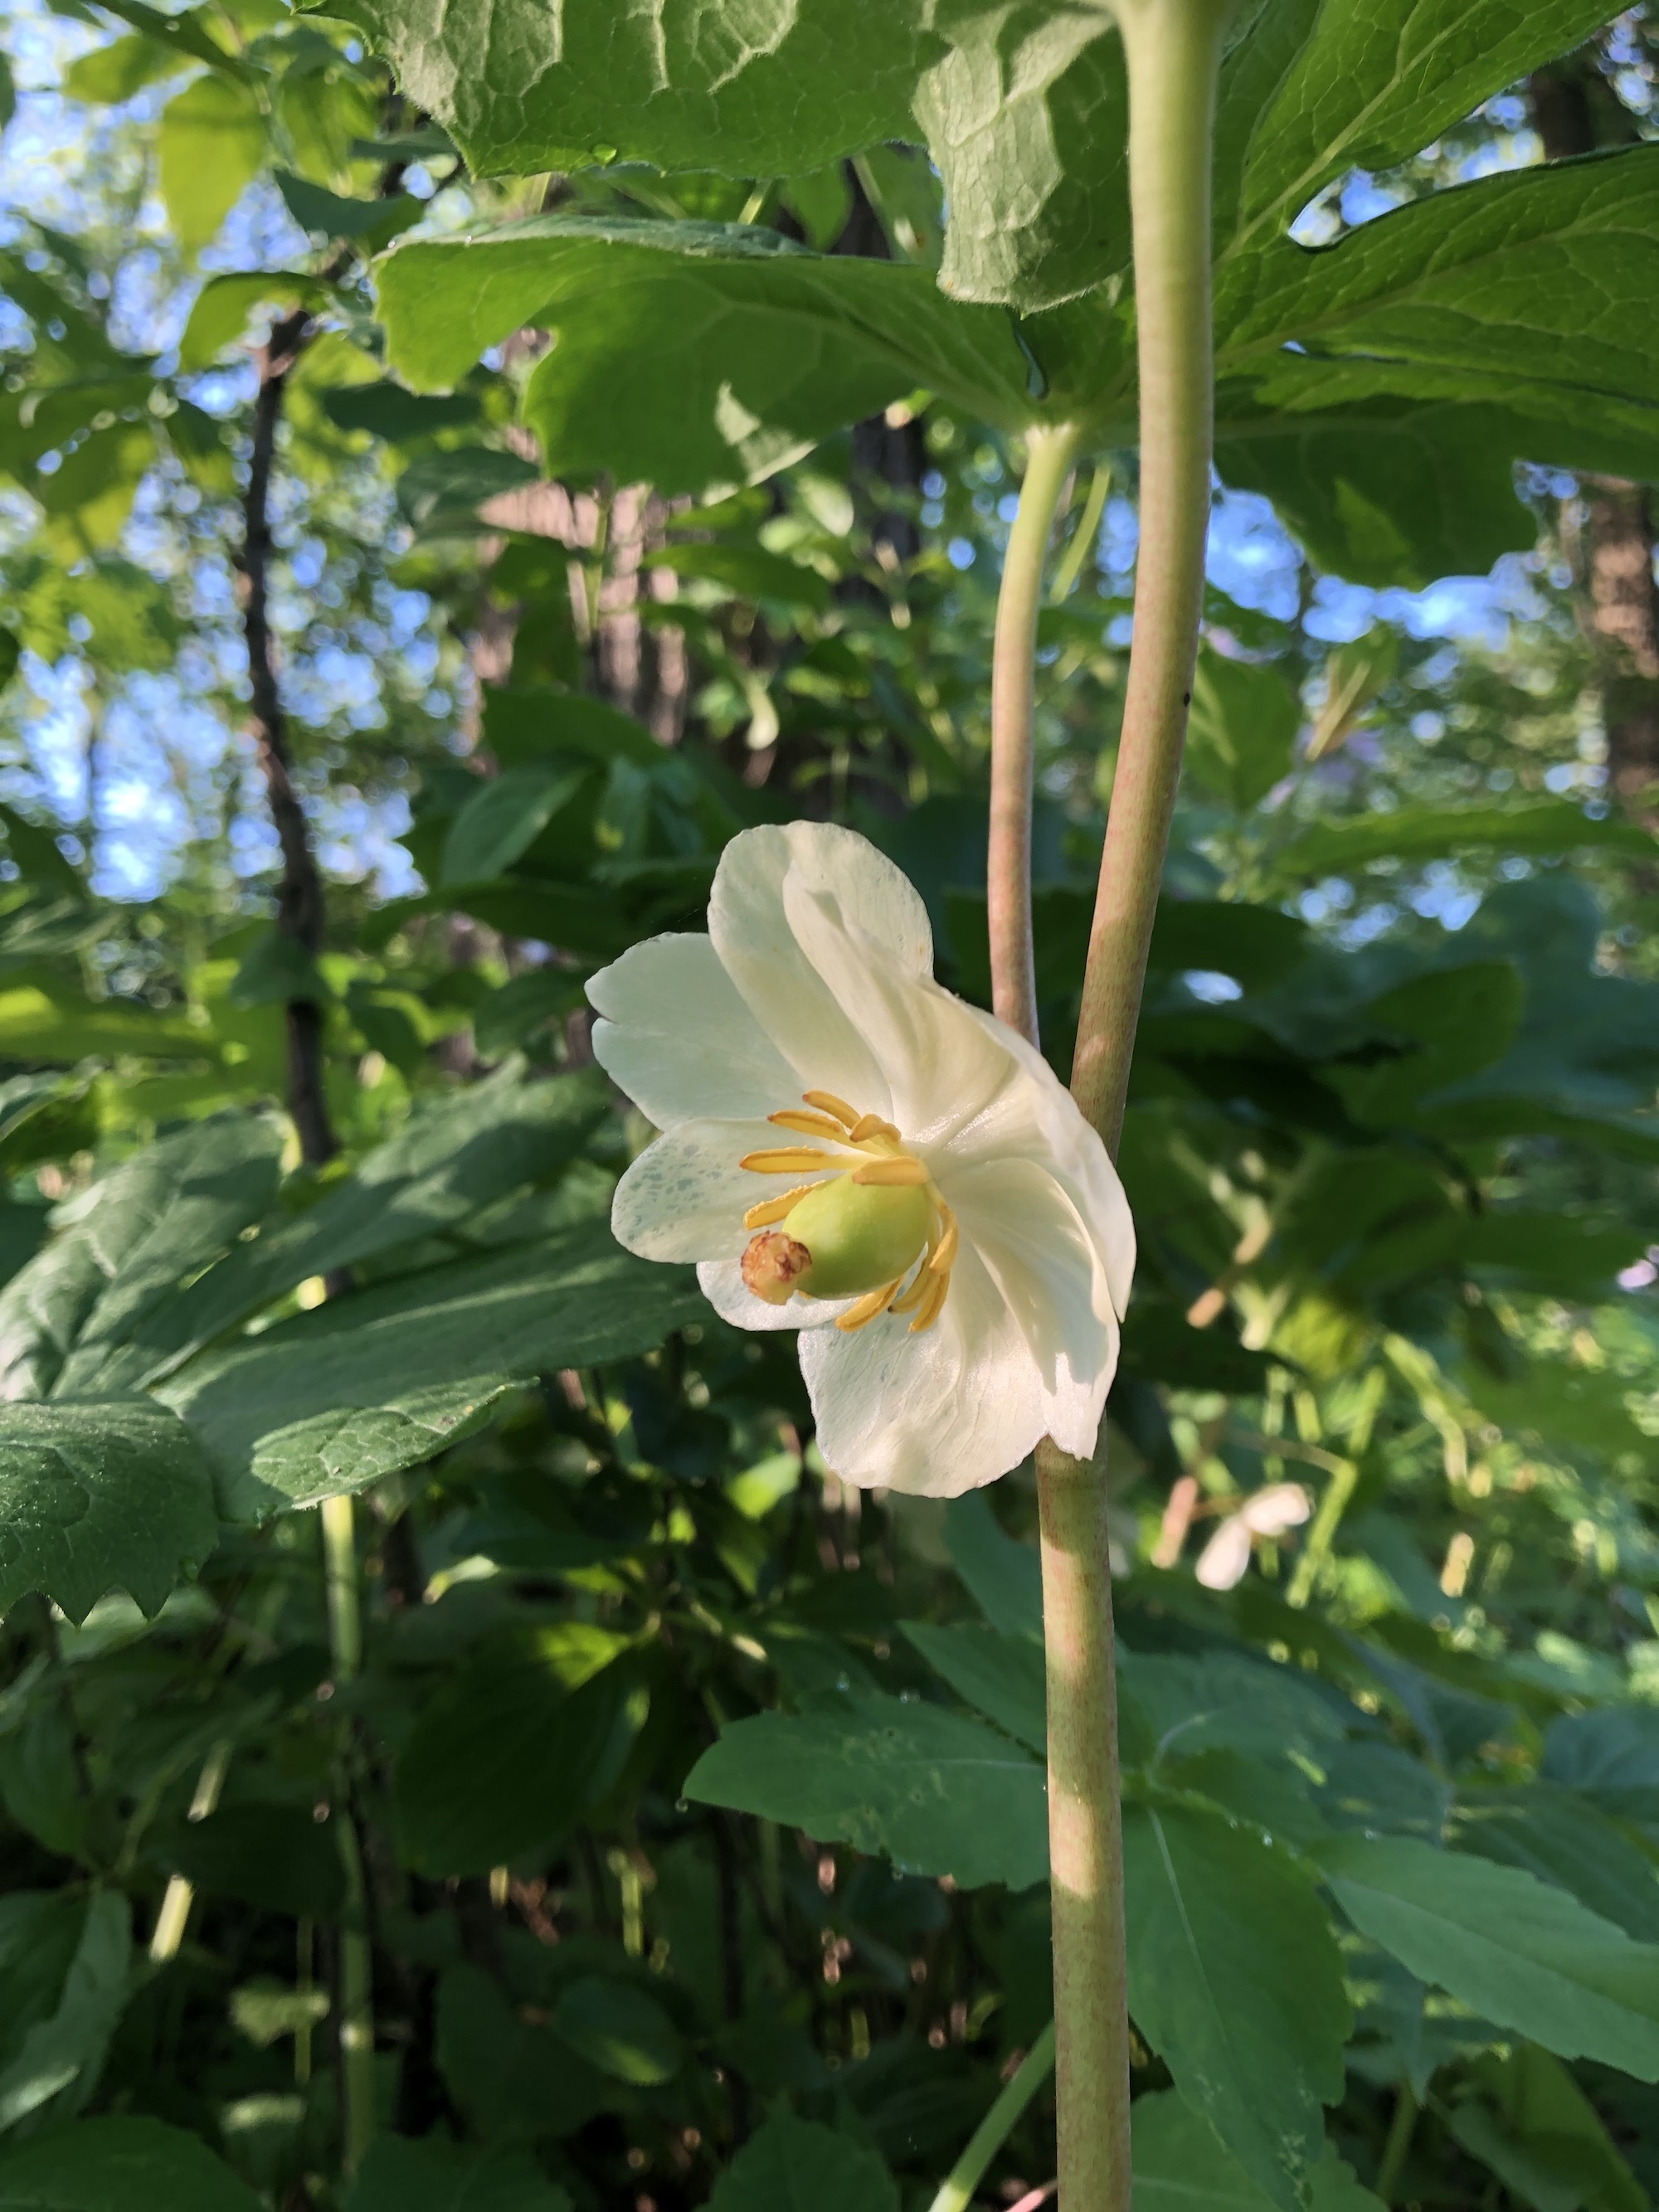 Mayapple blooms in wood between Duck Pond and Marion Dunn in Madison, Wisconsin on May 30, 2020.